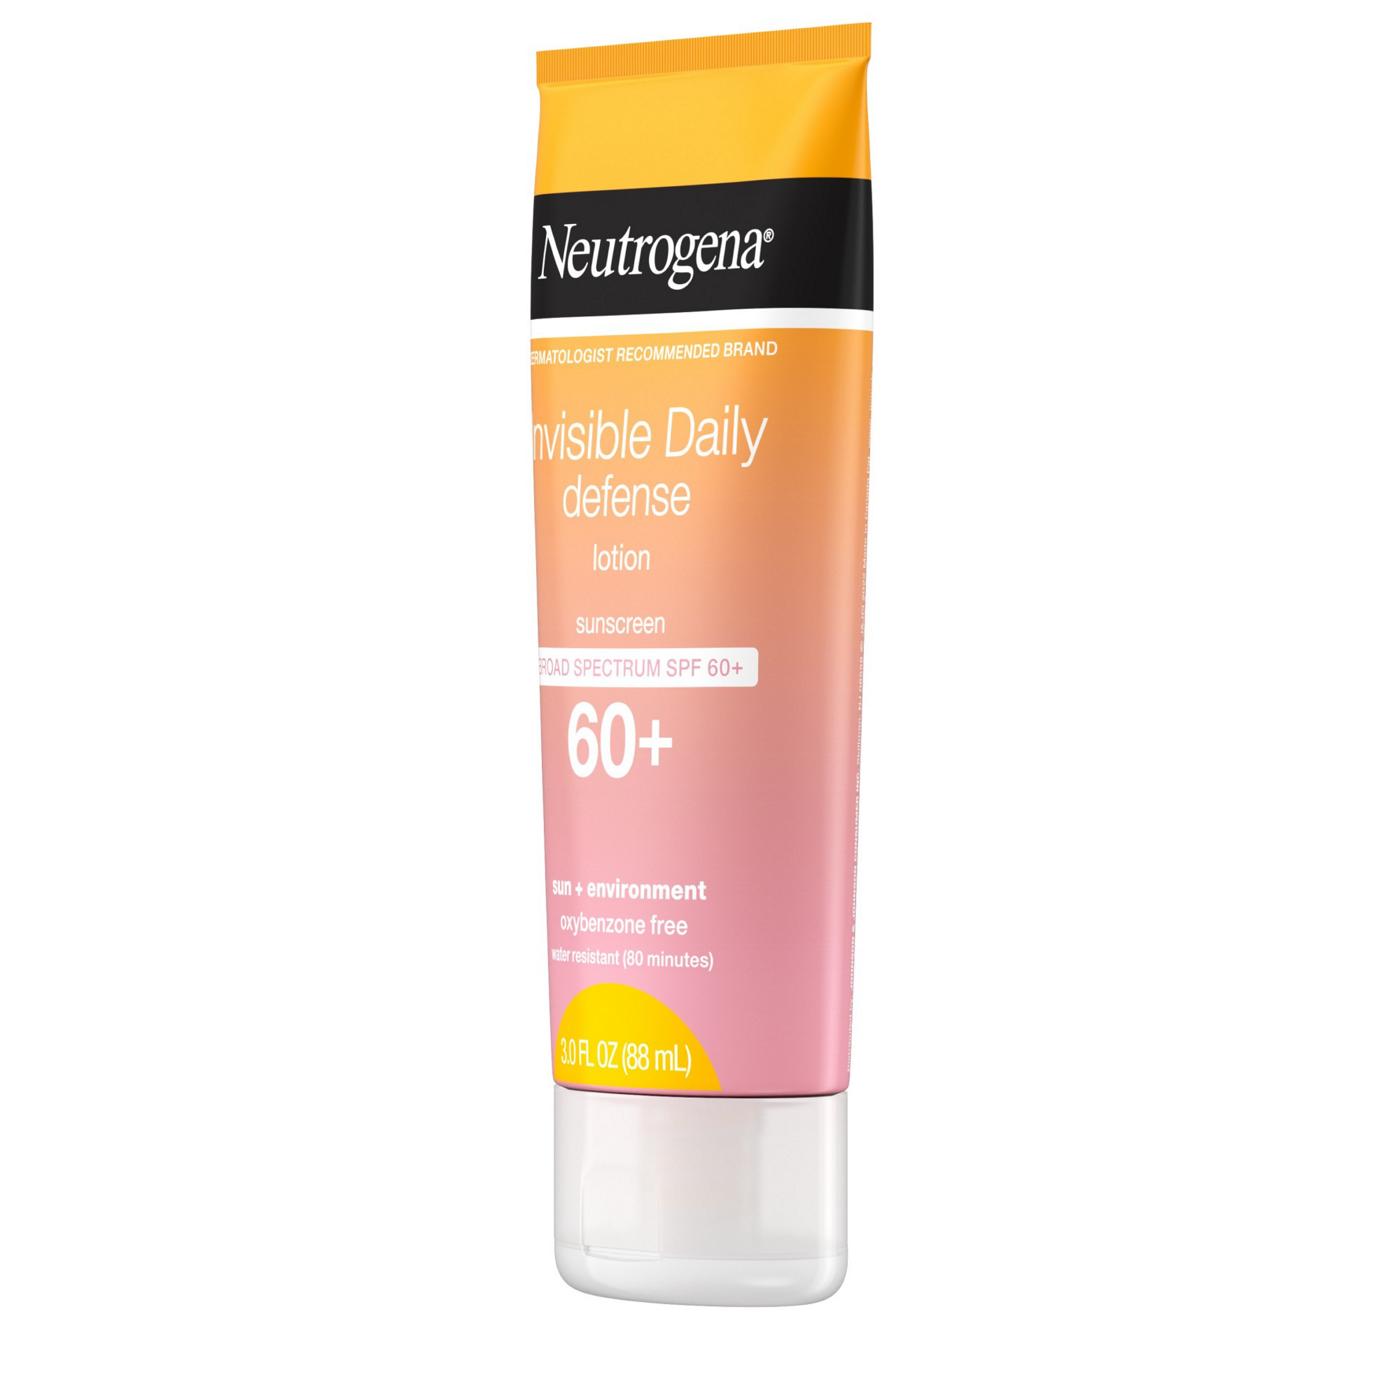 Neutrogena Invisible Daily Defense Sunscreen Lotion - SPF 60+; image 3 of 6